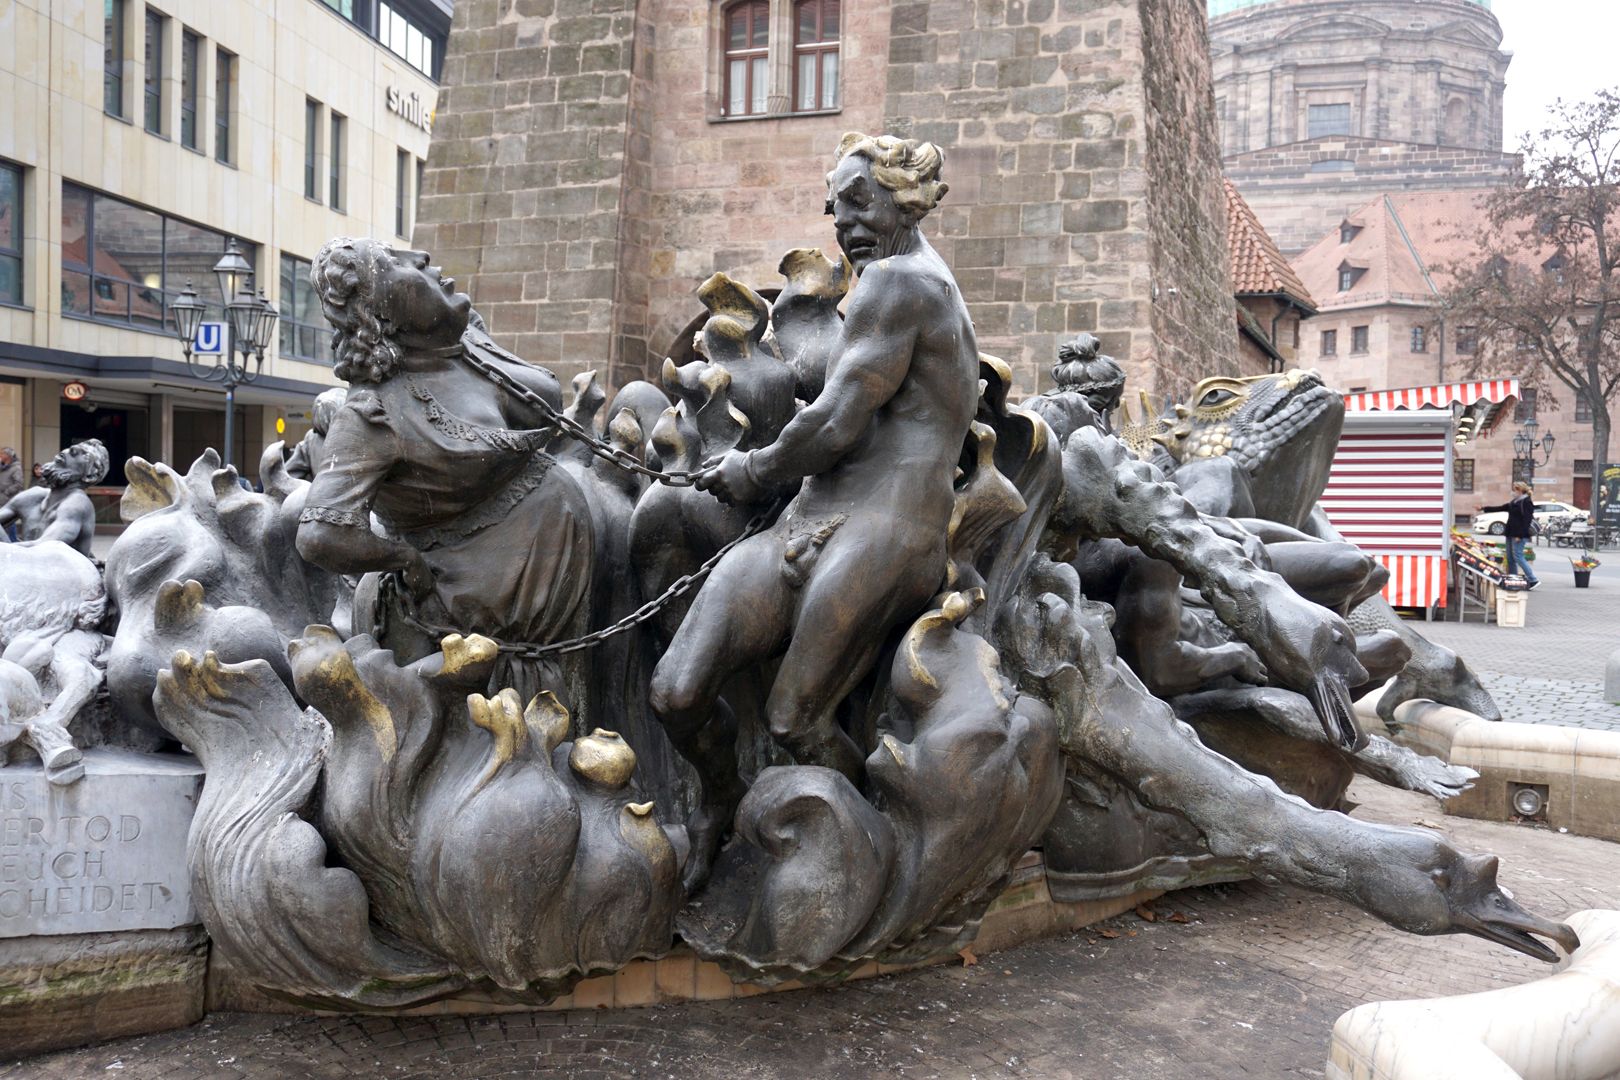 Marriage carousel/ Hans Sachs Fountain "Hell fire" with couple chained together